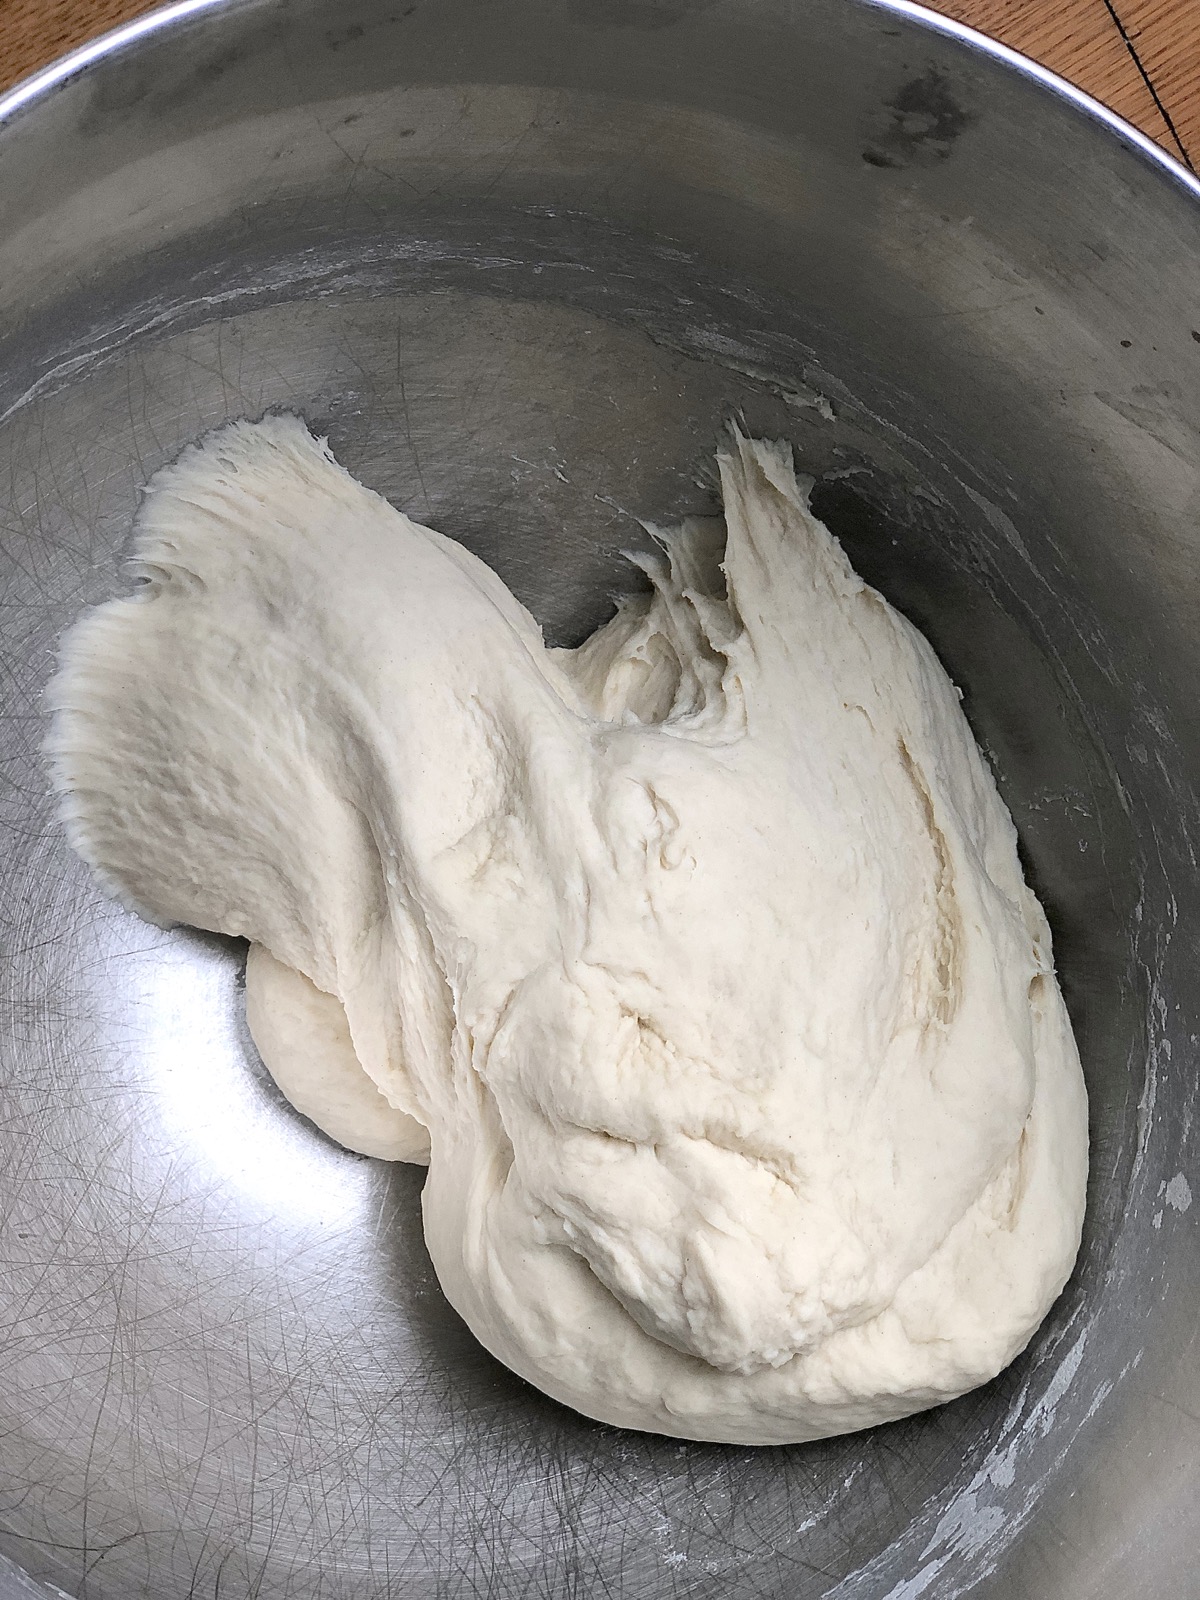 Kneaded dough in a stand mixer bowl, smooth but also barely sticking to the bottom and sides of the bowl.